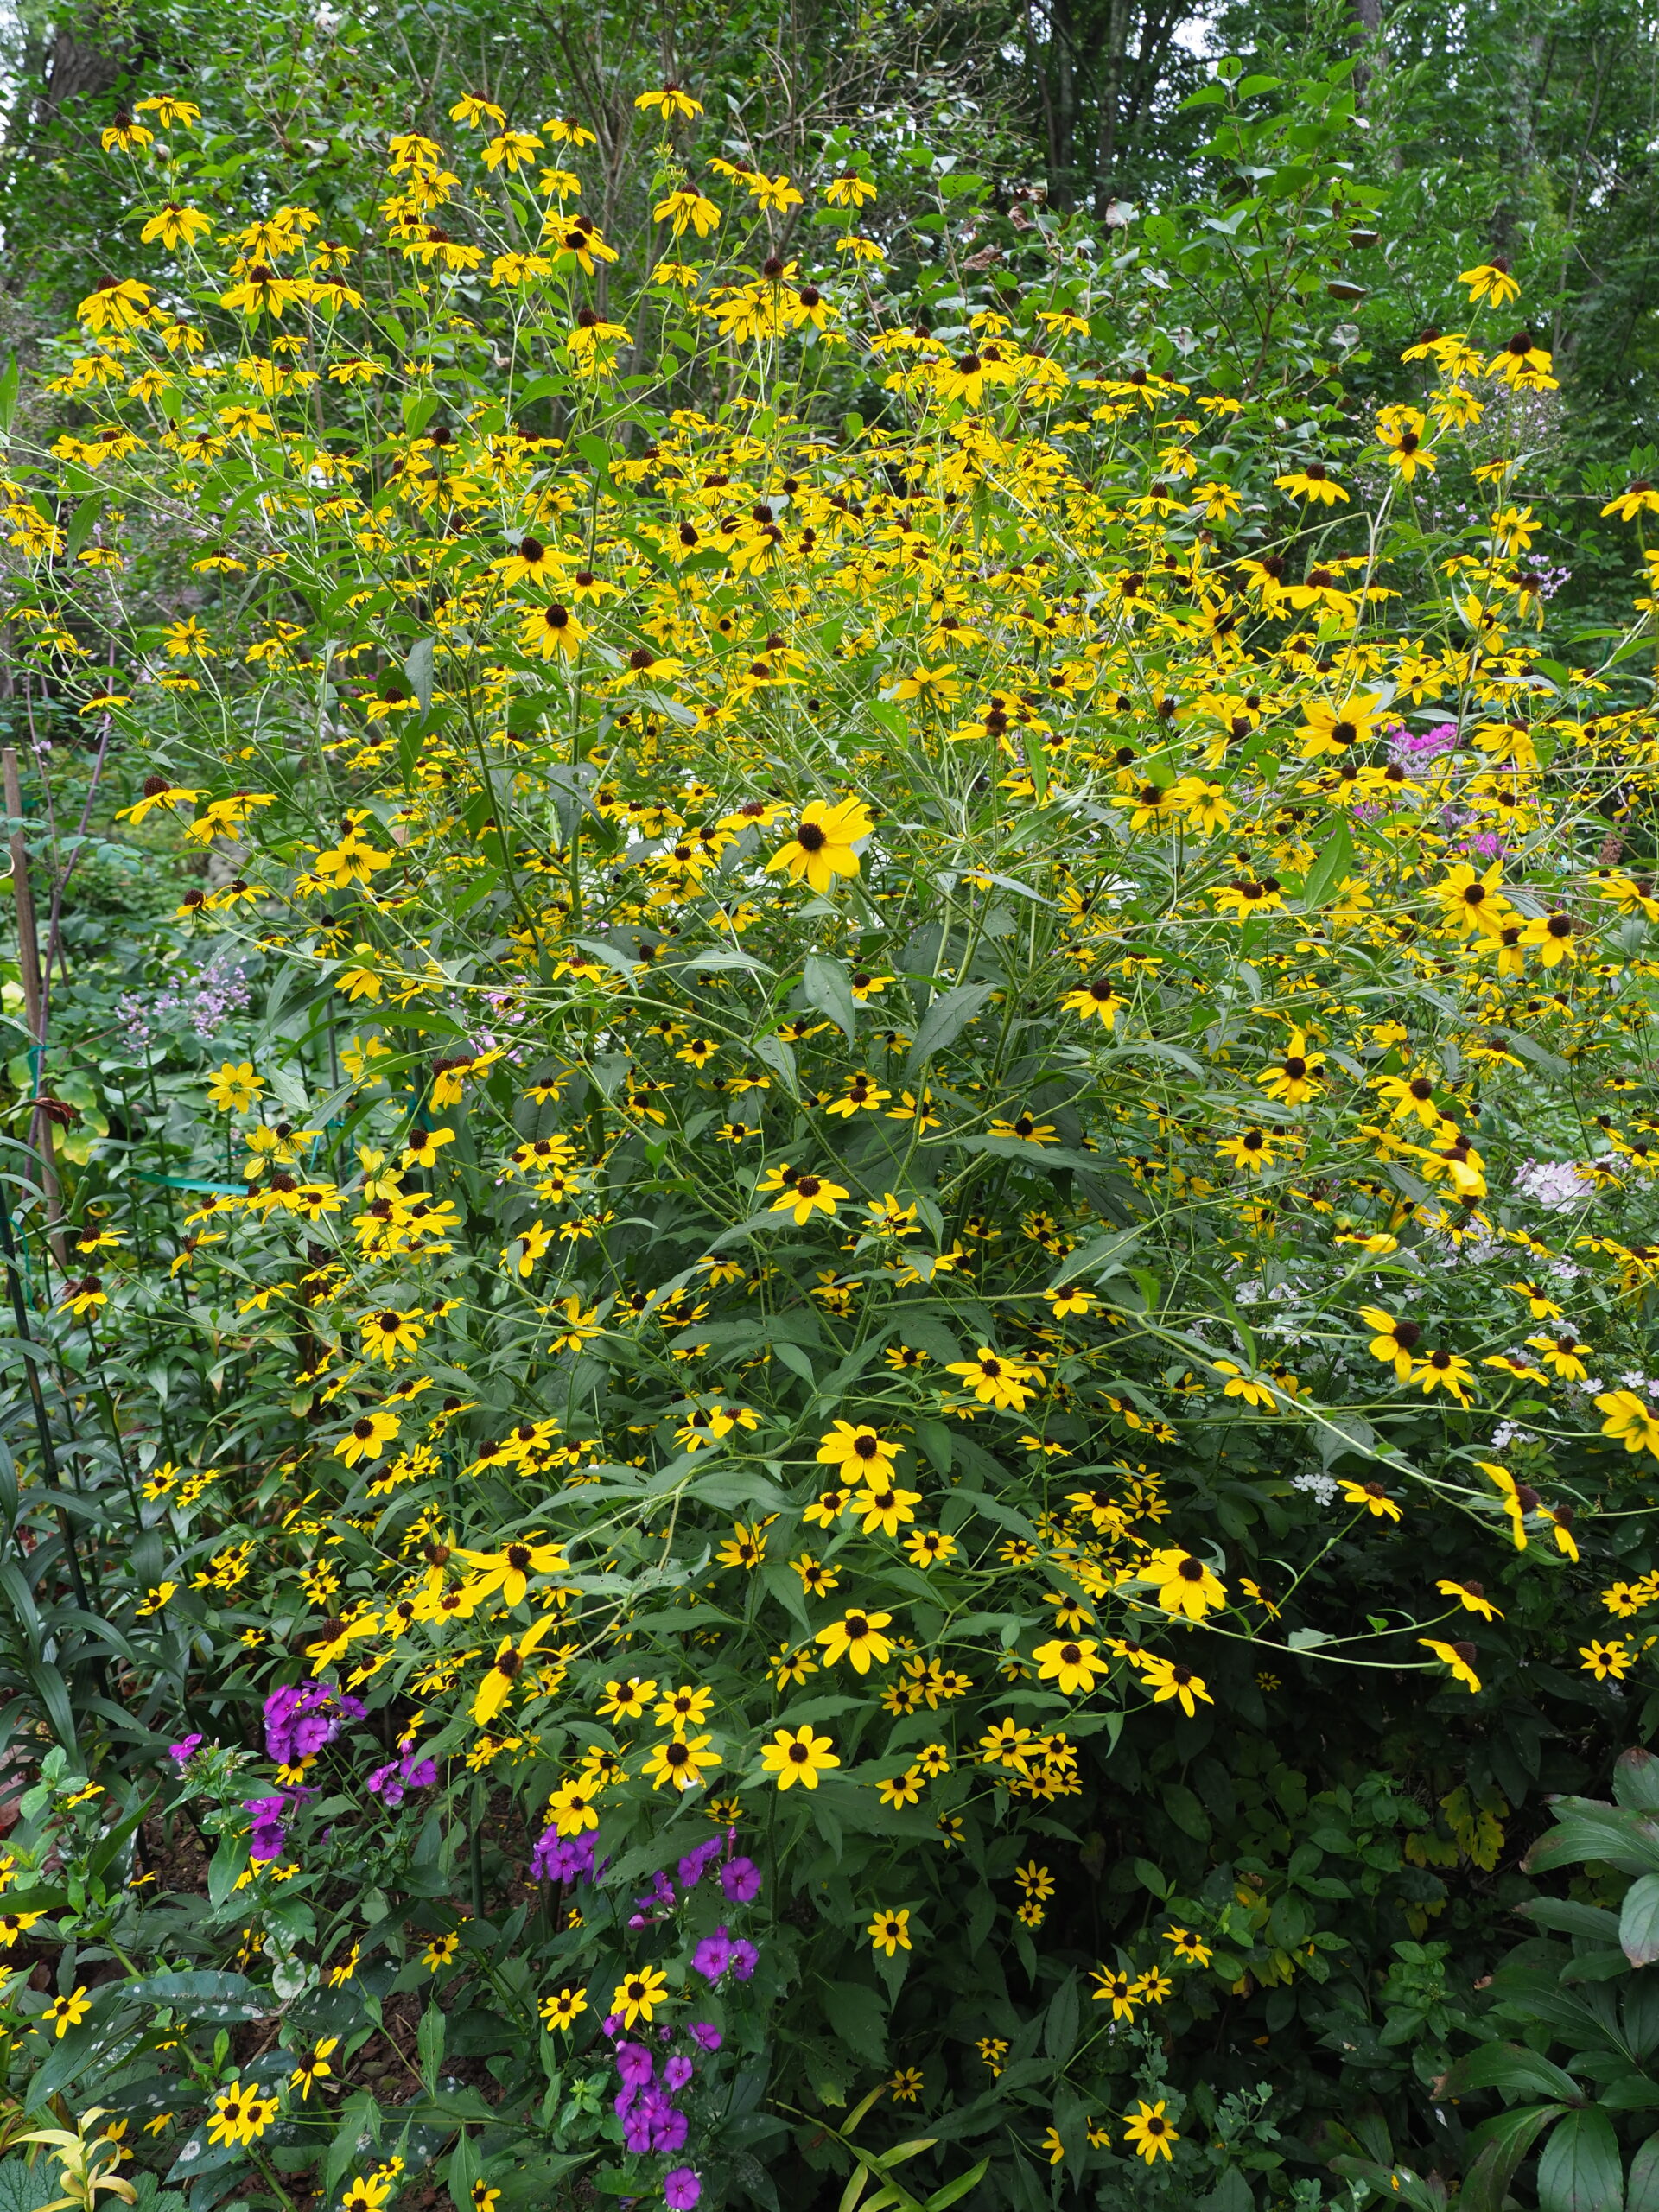 Some literature says that Rudbeckia triloba grows 4 to 5 feet tall. Here it’s about 8 to 9 feet tall in September. As the seeds in the brown buttons ripen, the goldfinches will descend on the plants to feast. Due to the birds' yellow colors it’s often difficult to notice them until they fly off. ANDREW MESSINGER